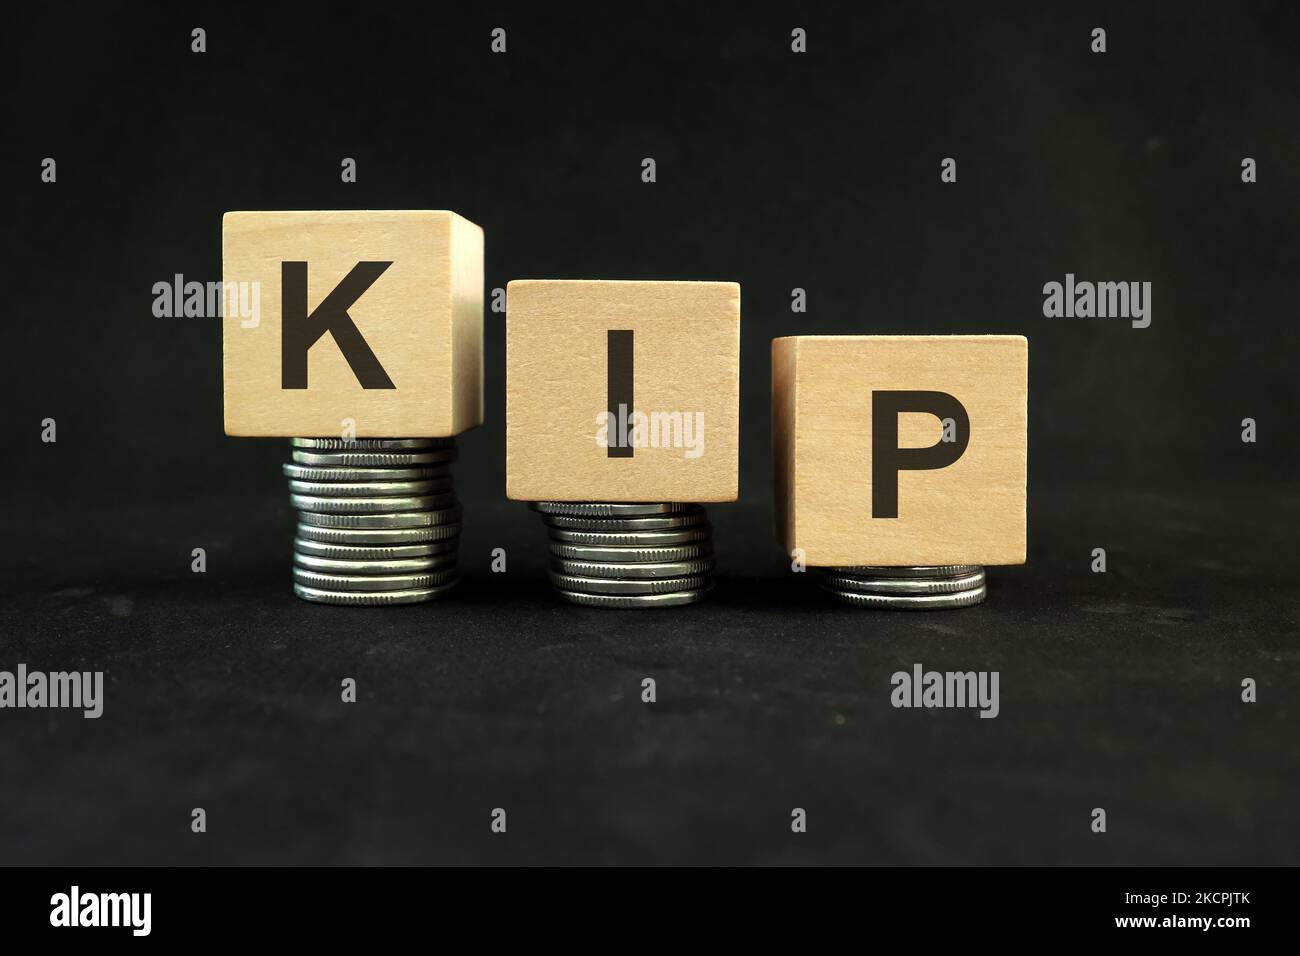 Laotian kip currency weakening, value depreciation and devaluation concept. Decreasing stack of coins on dark black background. Stock Photo